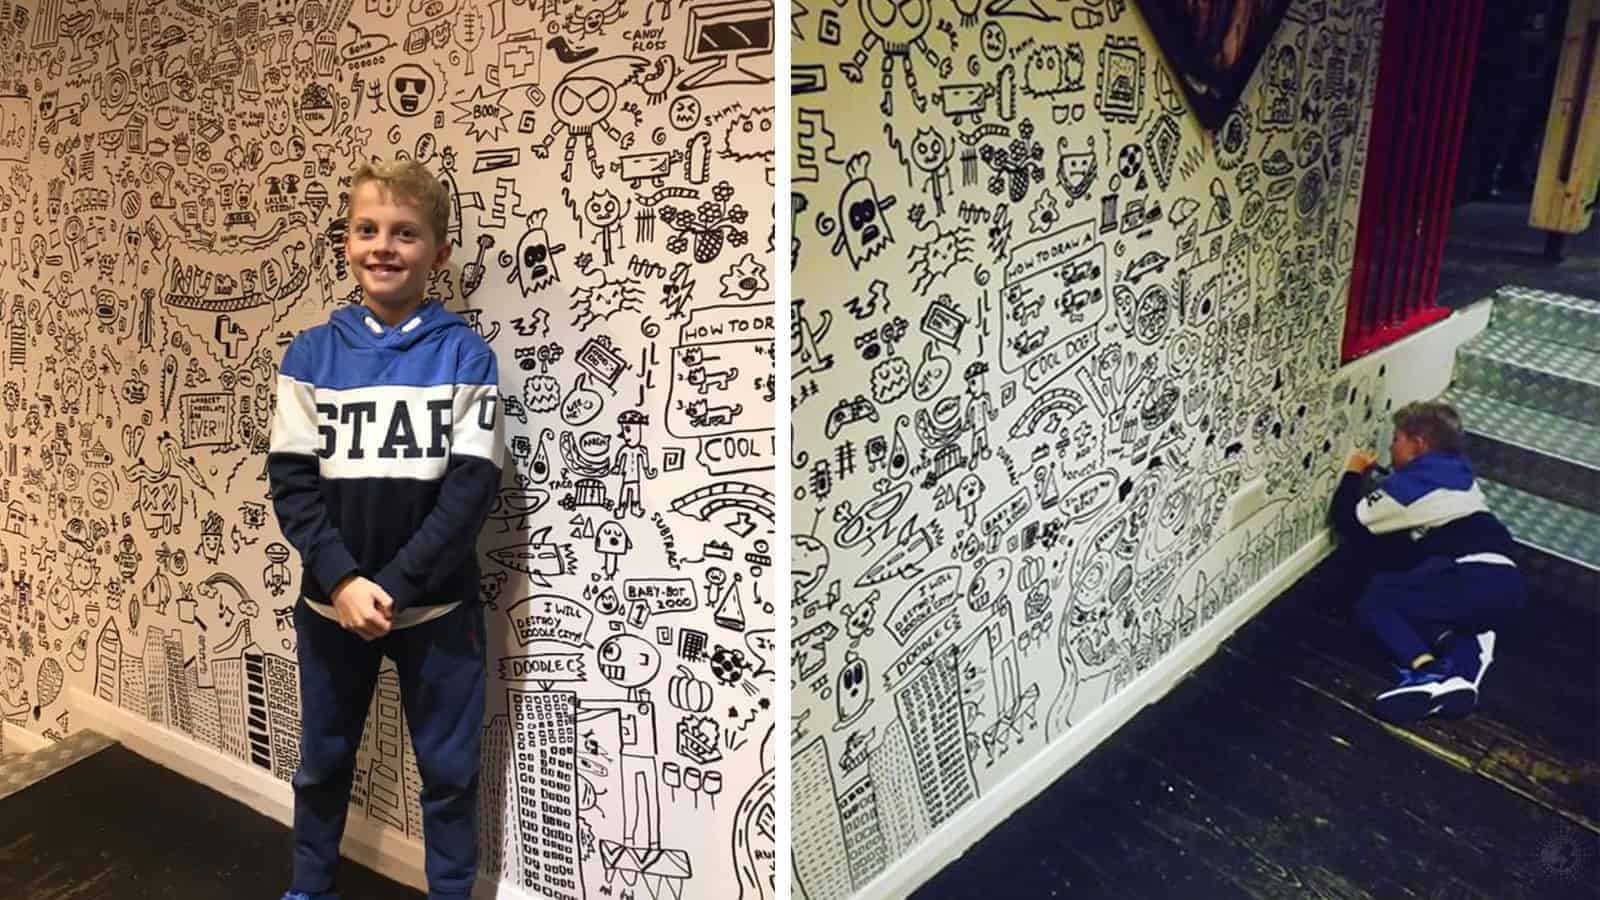 Kid In Trouble For Doodling Hired By Local Restaurant to Create Wall Art